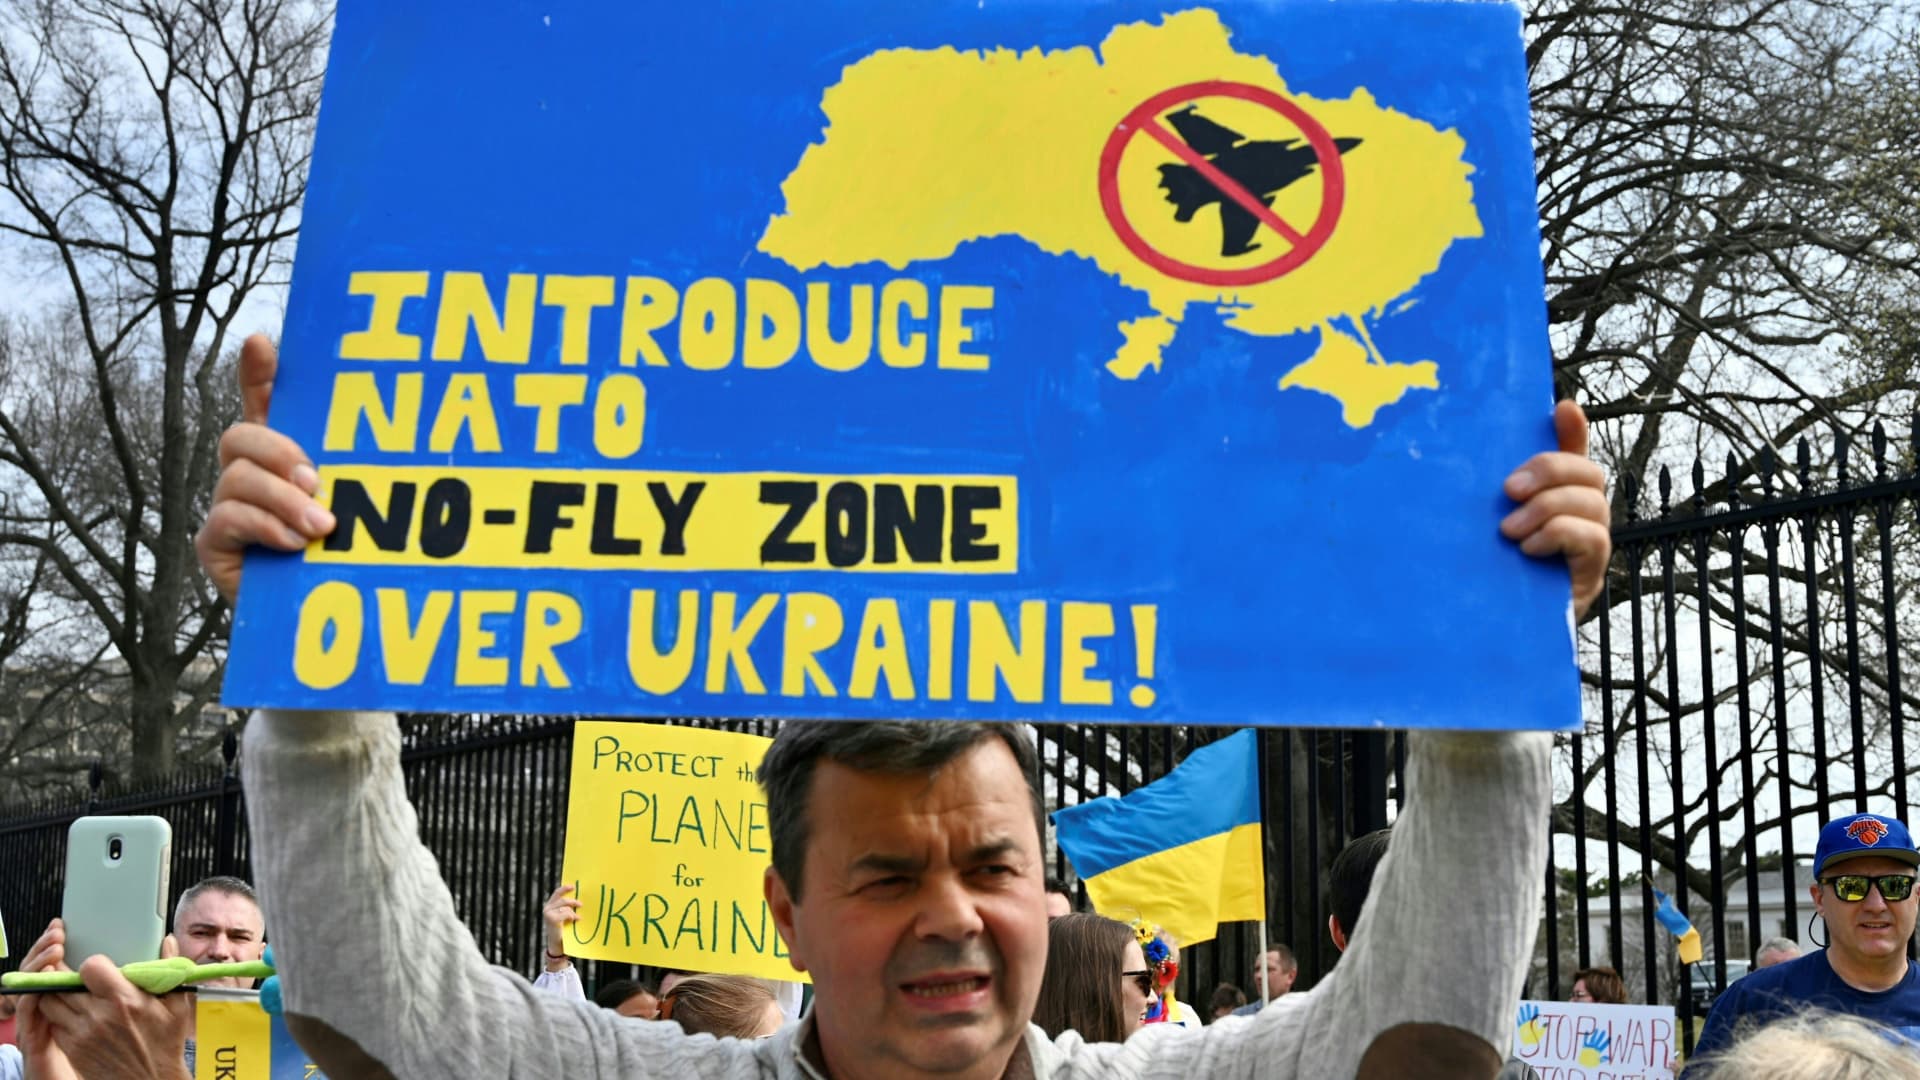 Supporters hold up signs during a rally protesting the Russian invasion of Ukraine at Lafayette Square across the White House in Washington, DC, on March 6, 2022.